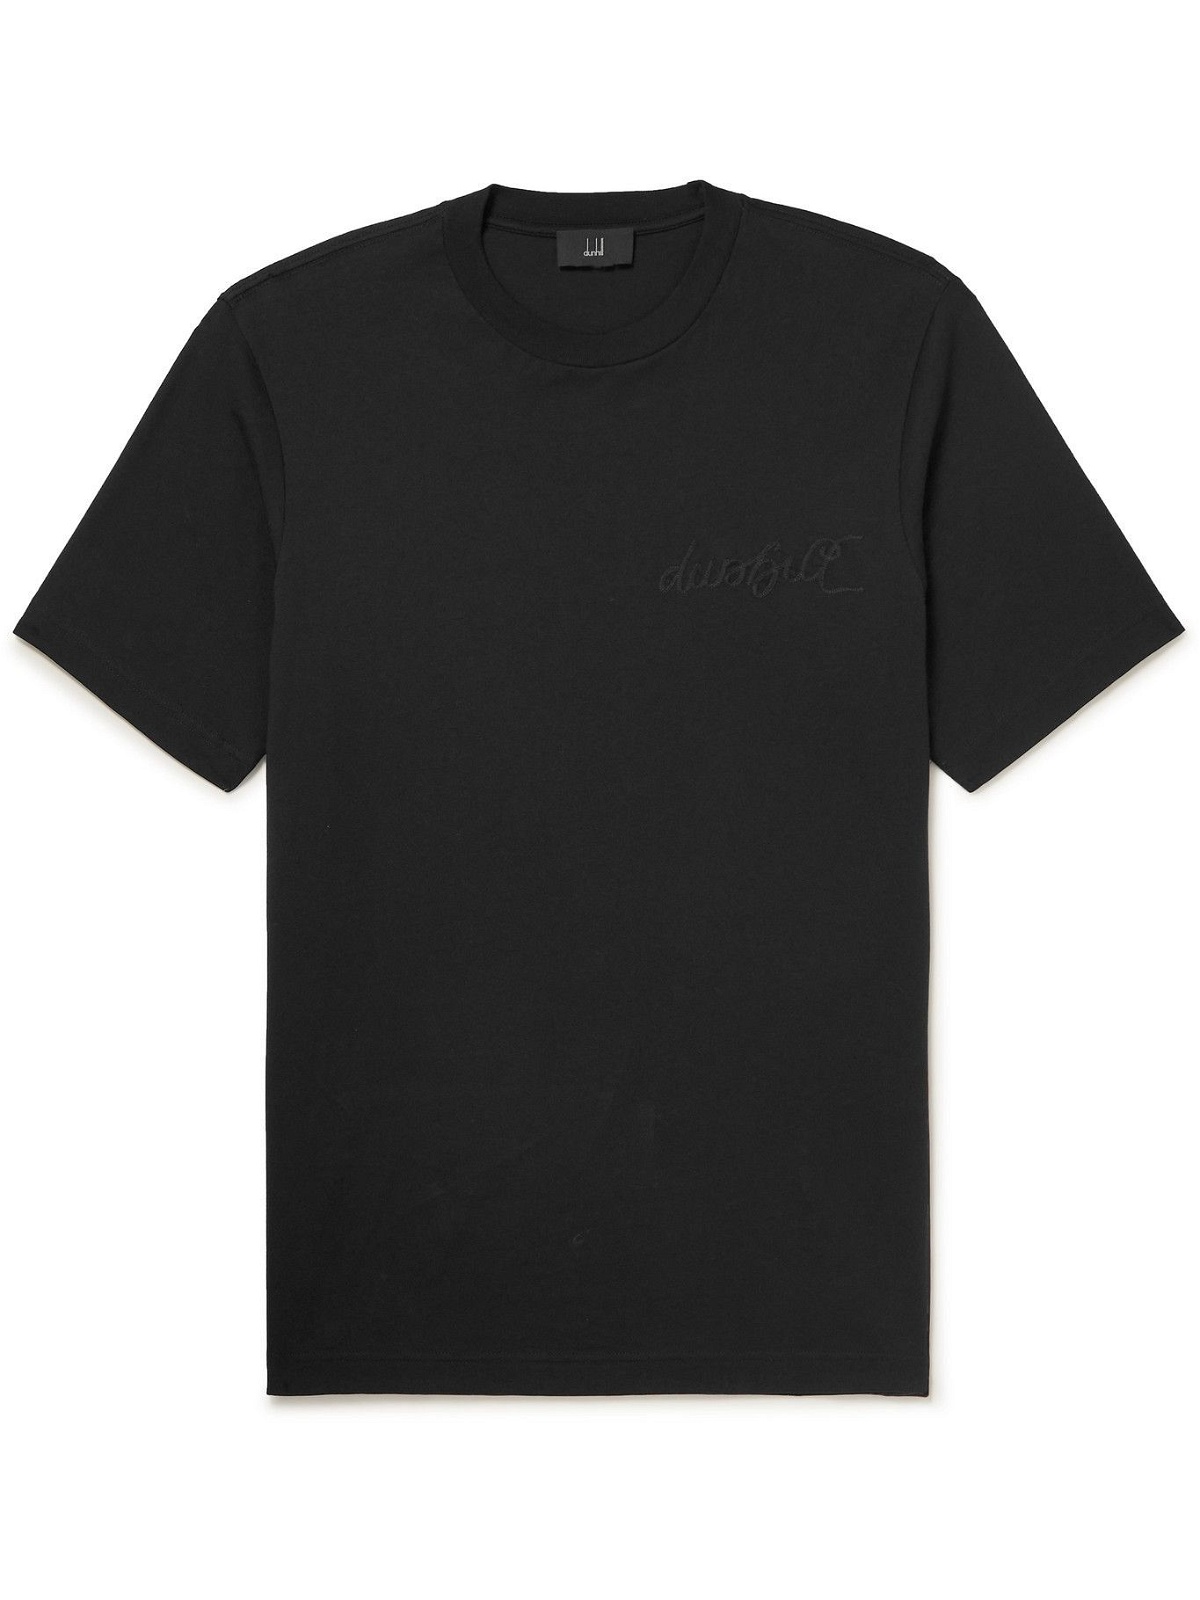 DUNHILL - Logo-Embroidered Cotton-Jersey T-Shirt - Black Dunhill